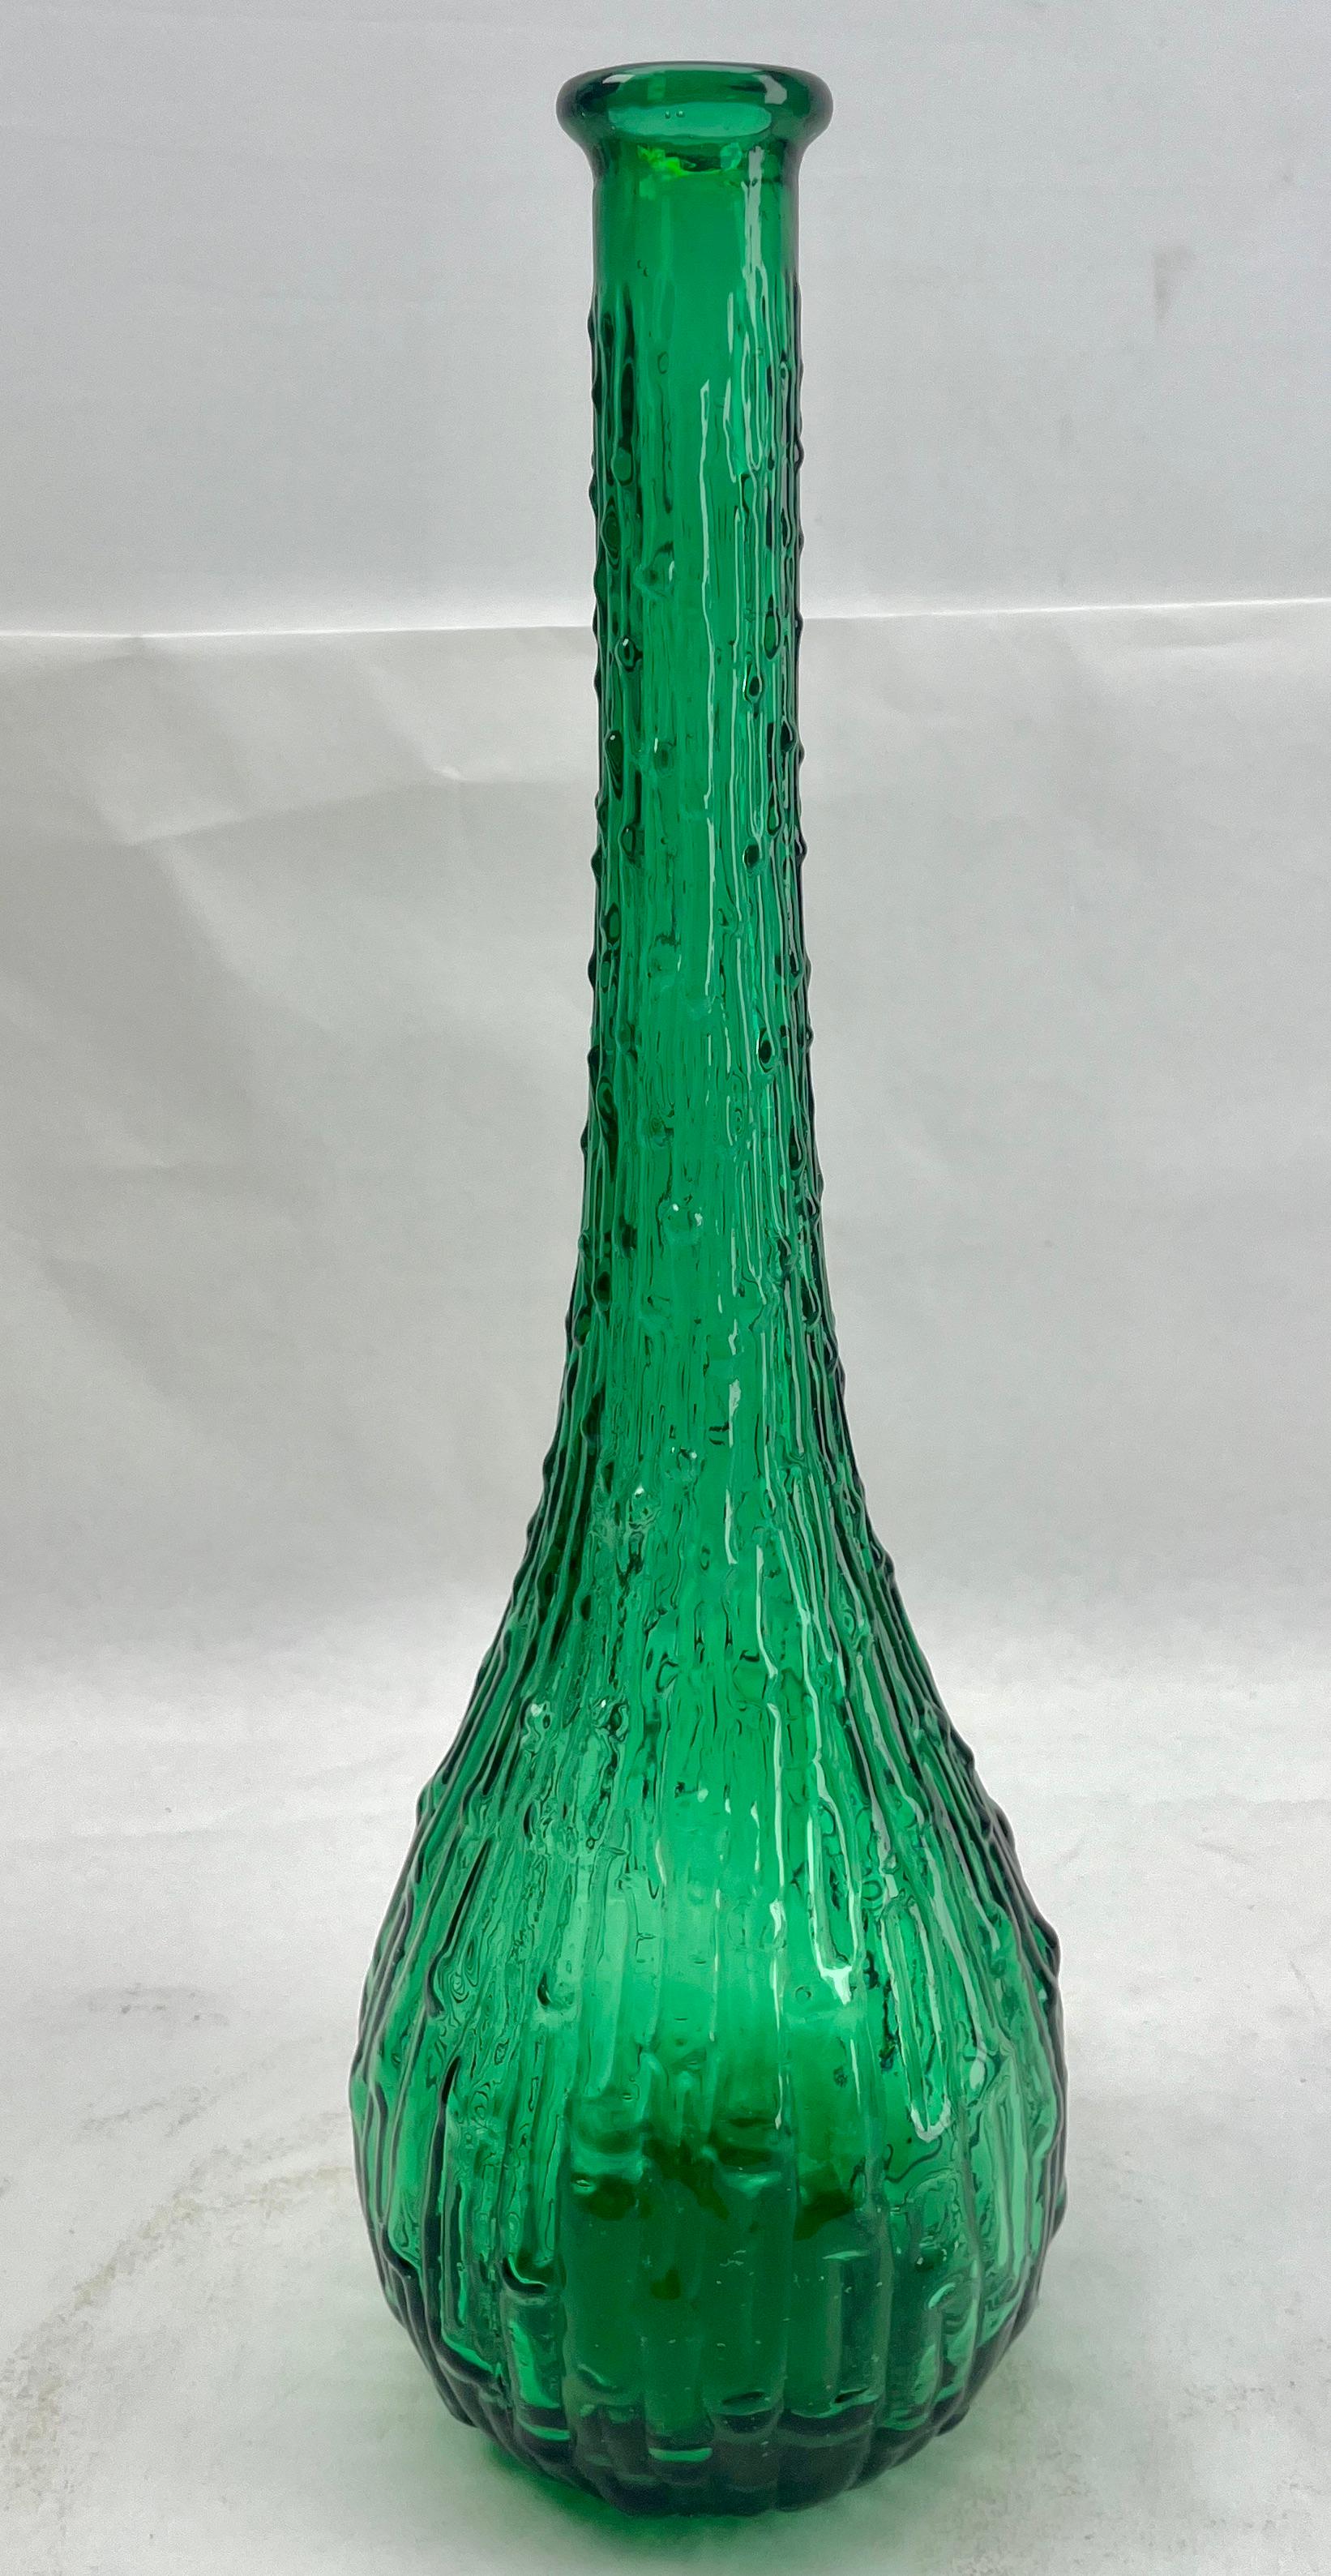 Italian Empoli Geniebottle Green Art Glass from the Mid-20th Century For Sale 5